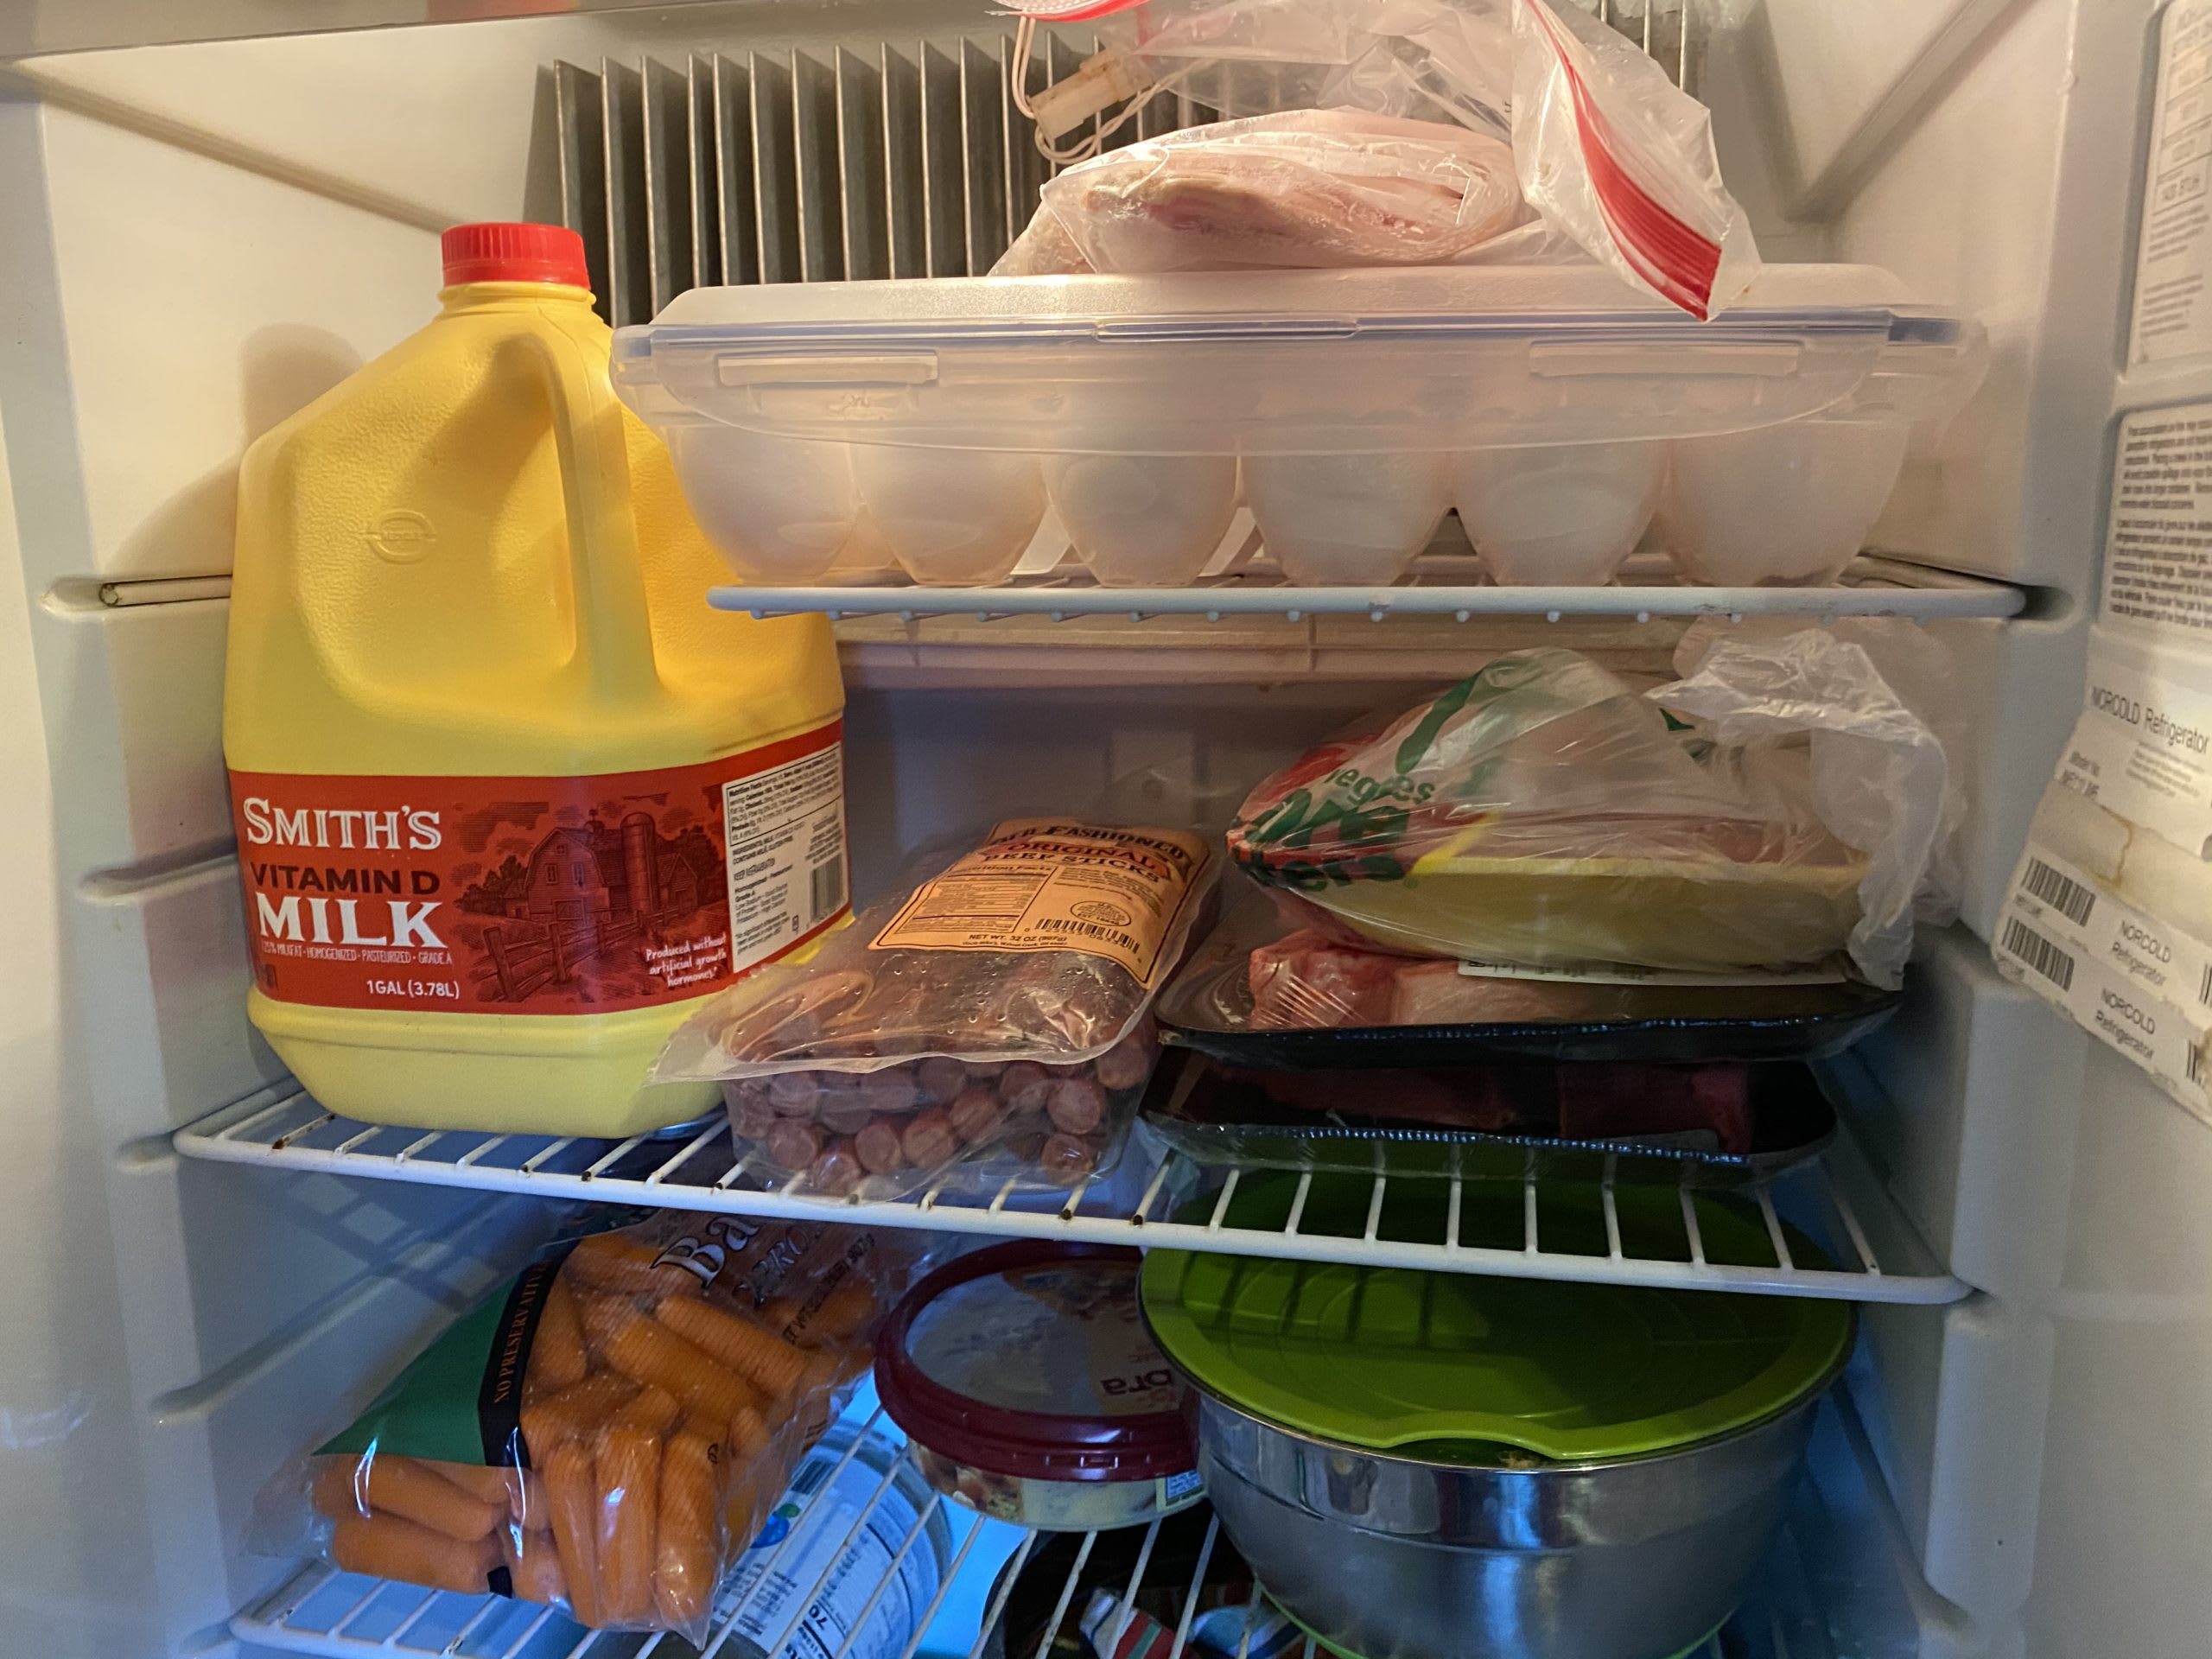 The top three shelves of our refrigerator. It is full of eggs, various meats, leftovers, milk, and carrots.